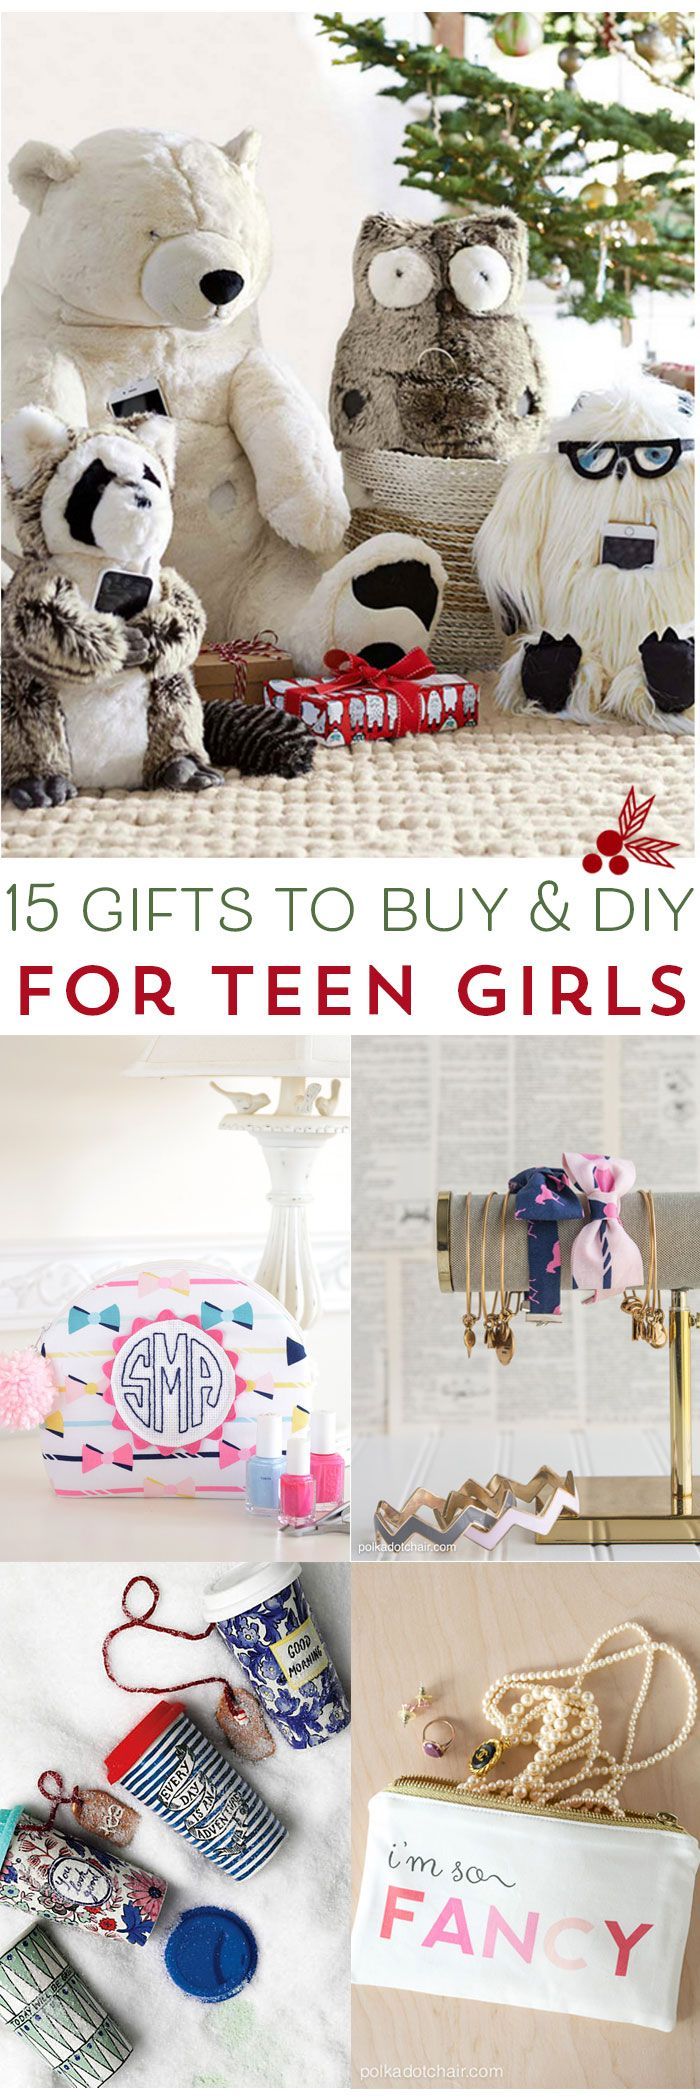 Gift Ideas for Teenage Girls; Gifts to Make & Buy | Polka Dot Chair - Gift Ideas for Teenage Girls; Gifts to Make & Buy | Polka Dot Chair -   19 trendy diy For Teens ideas